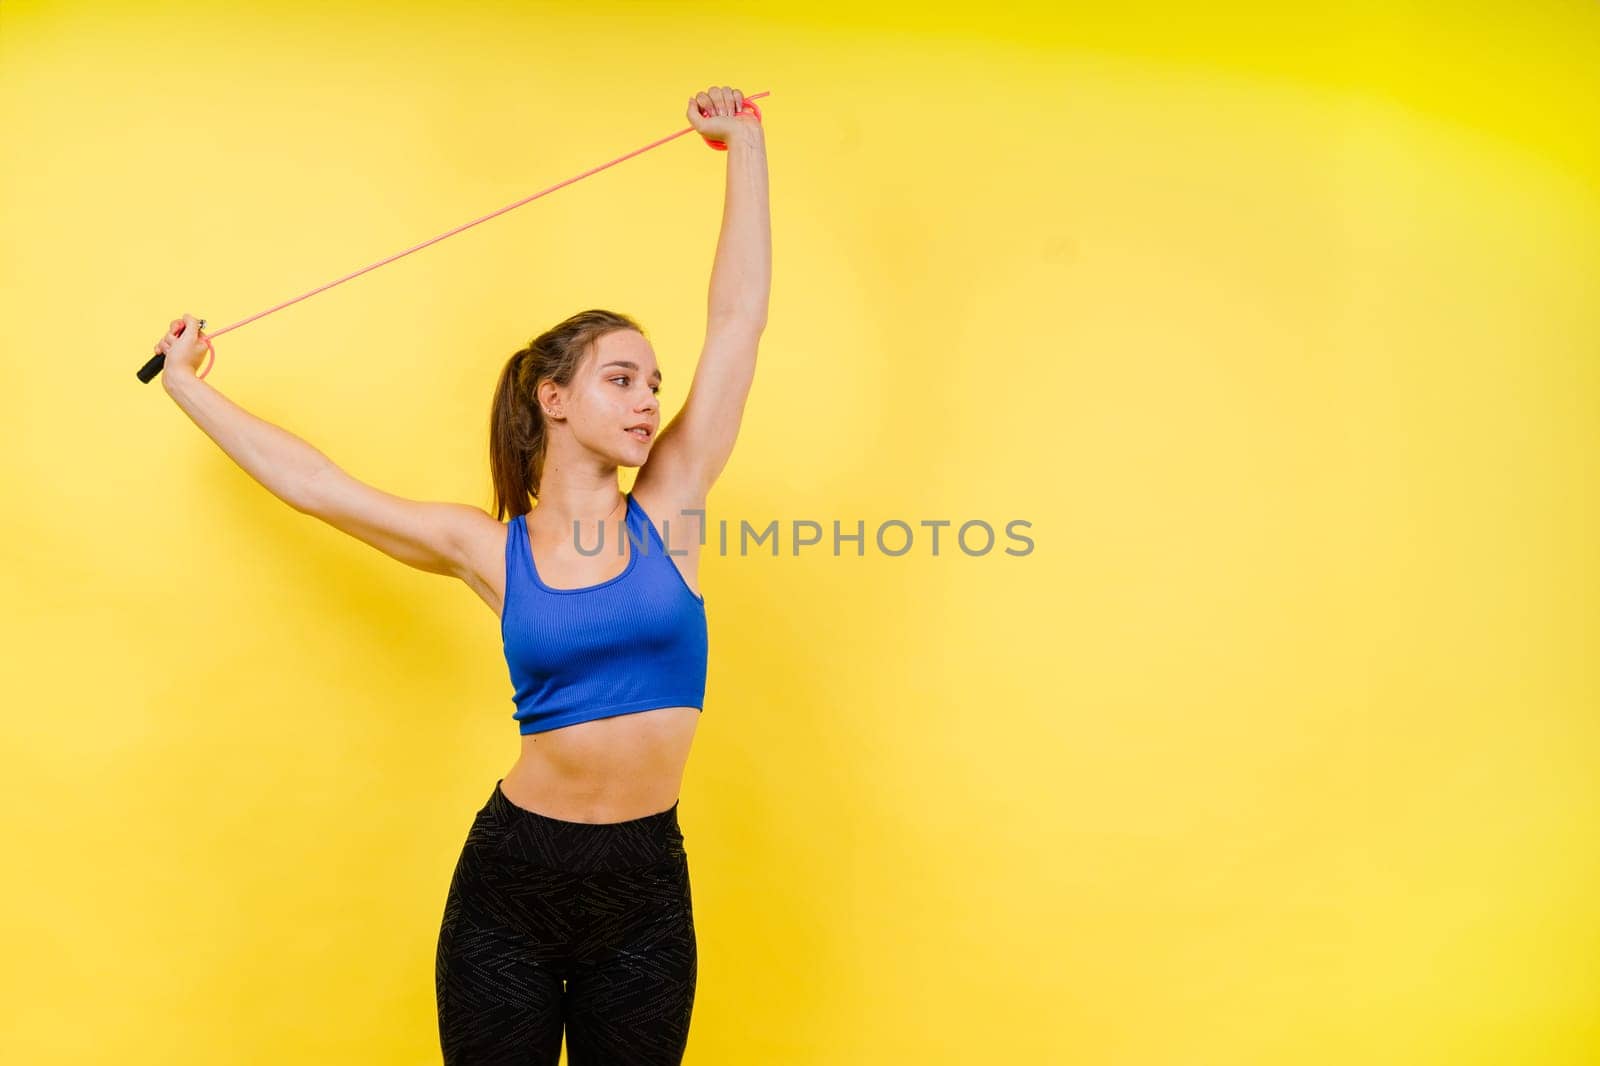 Portrait of gentle muscular woman holding skipping rope on her neck over yellow background